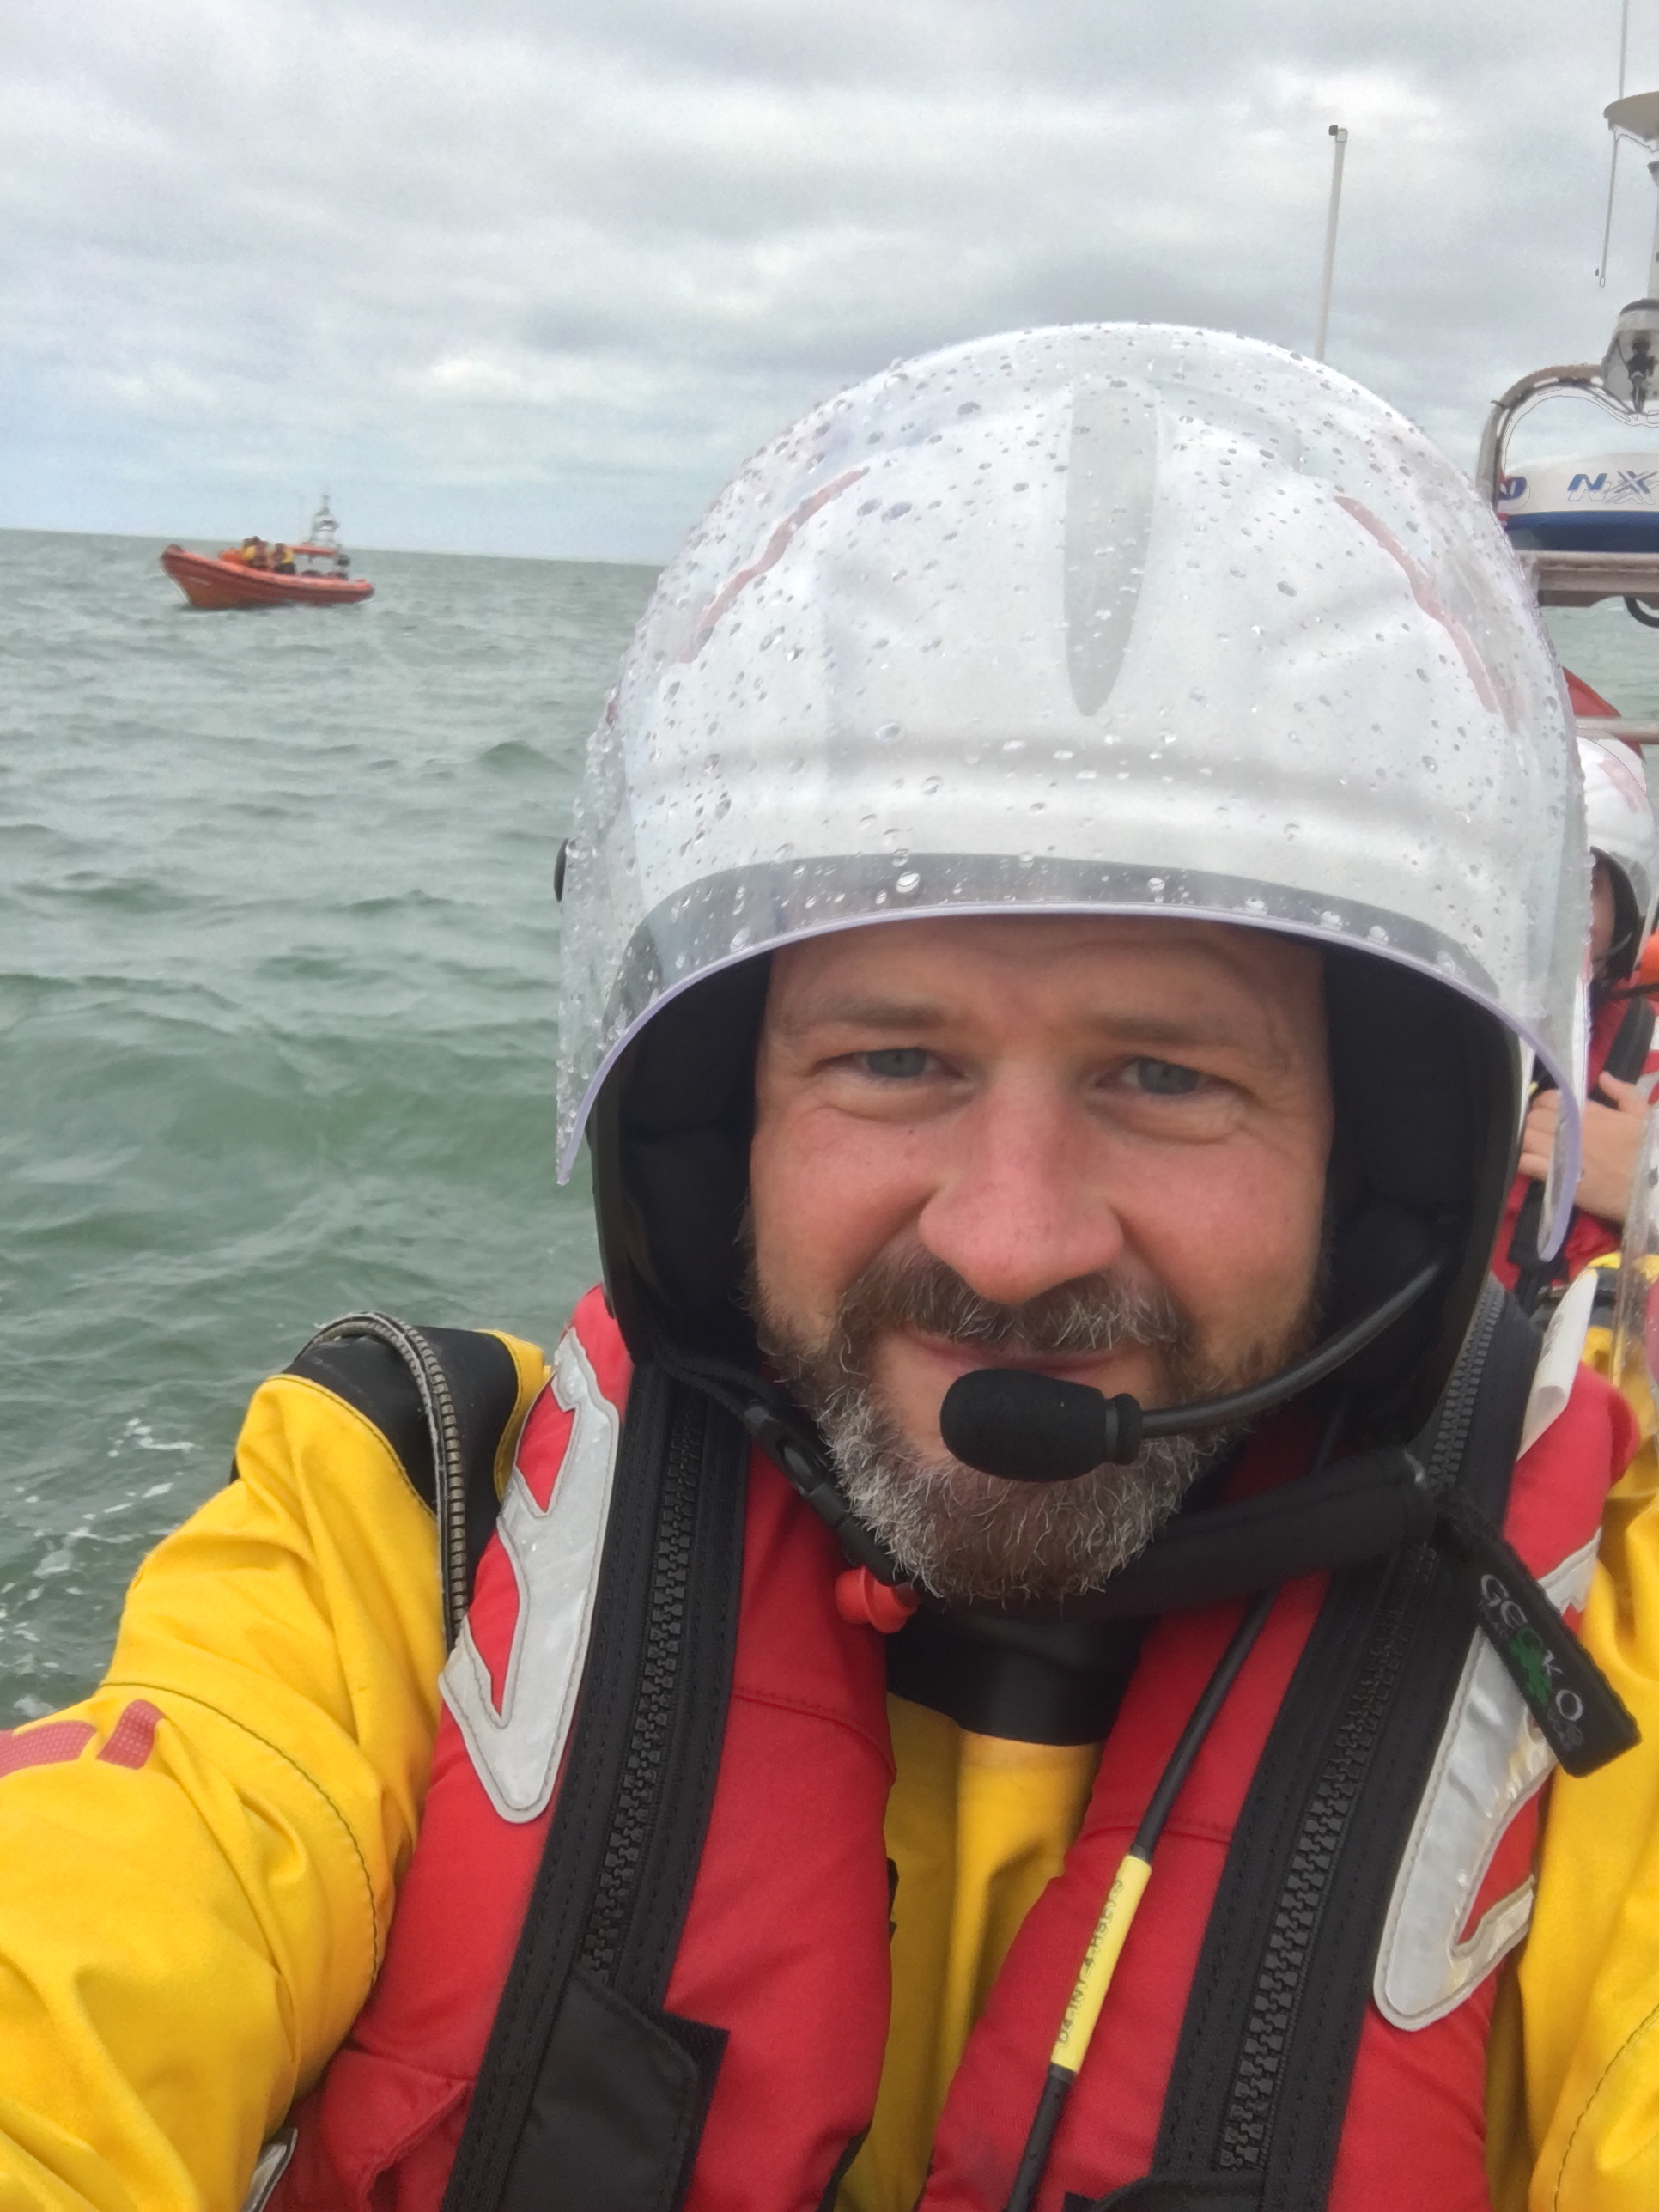 Guy Addington, 45 and from Margate in Kent, received his MBE for services to the RNLI where he is credited with saving 13 lives at sea and educating the public about water safety. He is among 200 recipients of awards in the 2022 Queen's Birthday Honours list who have been invited to the Queen's state funeral on Monday.